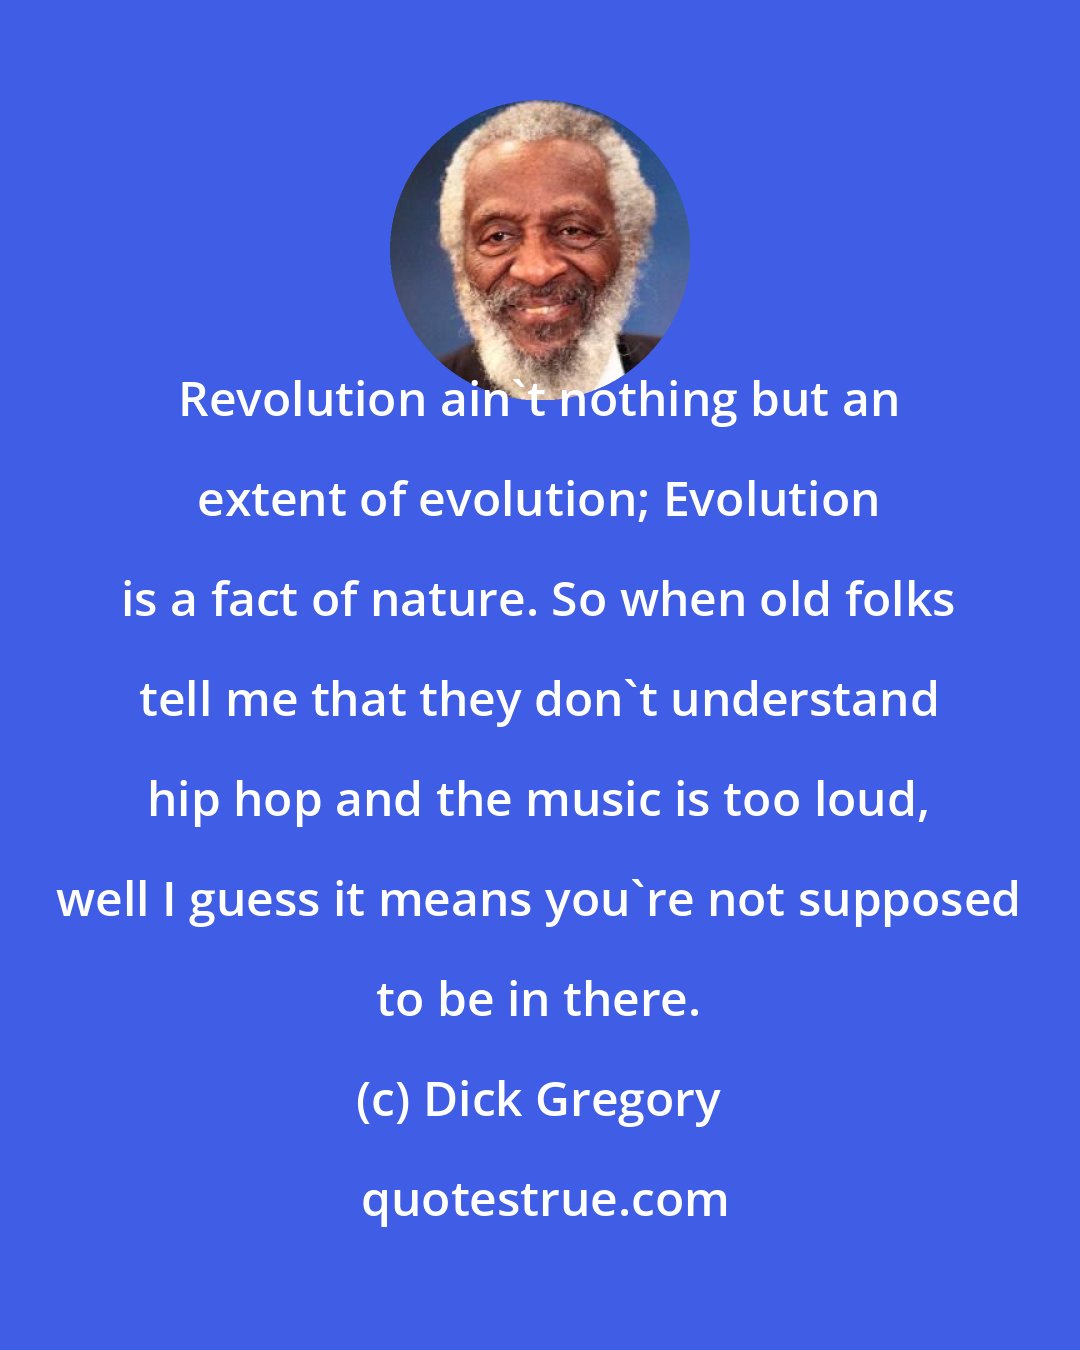 Dick Gregory: Revolution ain't nothing but an extent of evolution; Evolution is a fact of nature. So when old folks tell me that they don't understand hip hop and the music is too loud, well I guess it means you're not supposed to be in there.